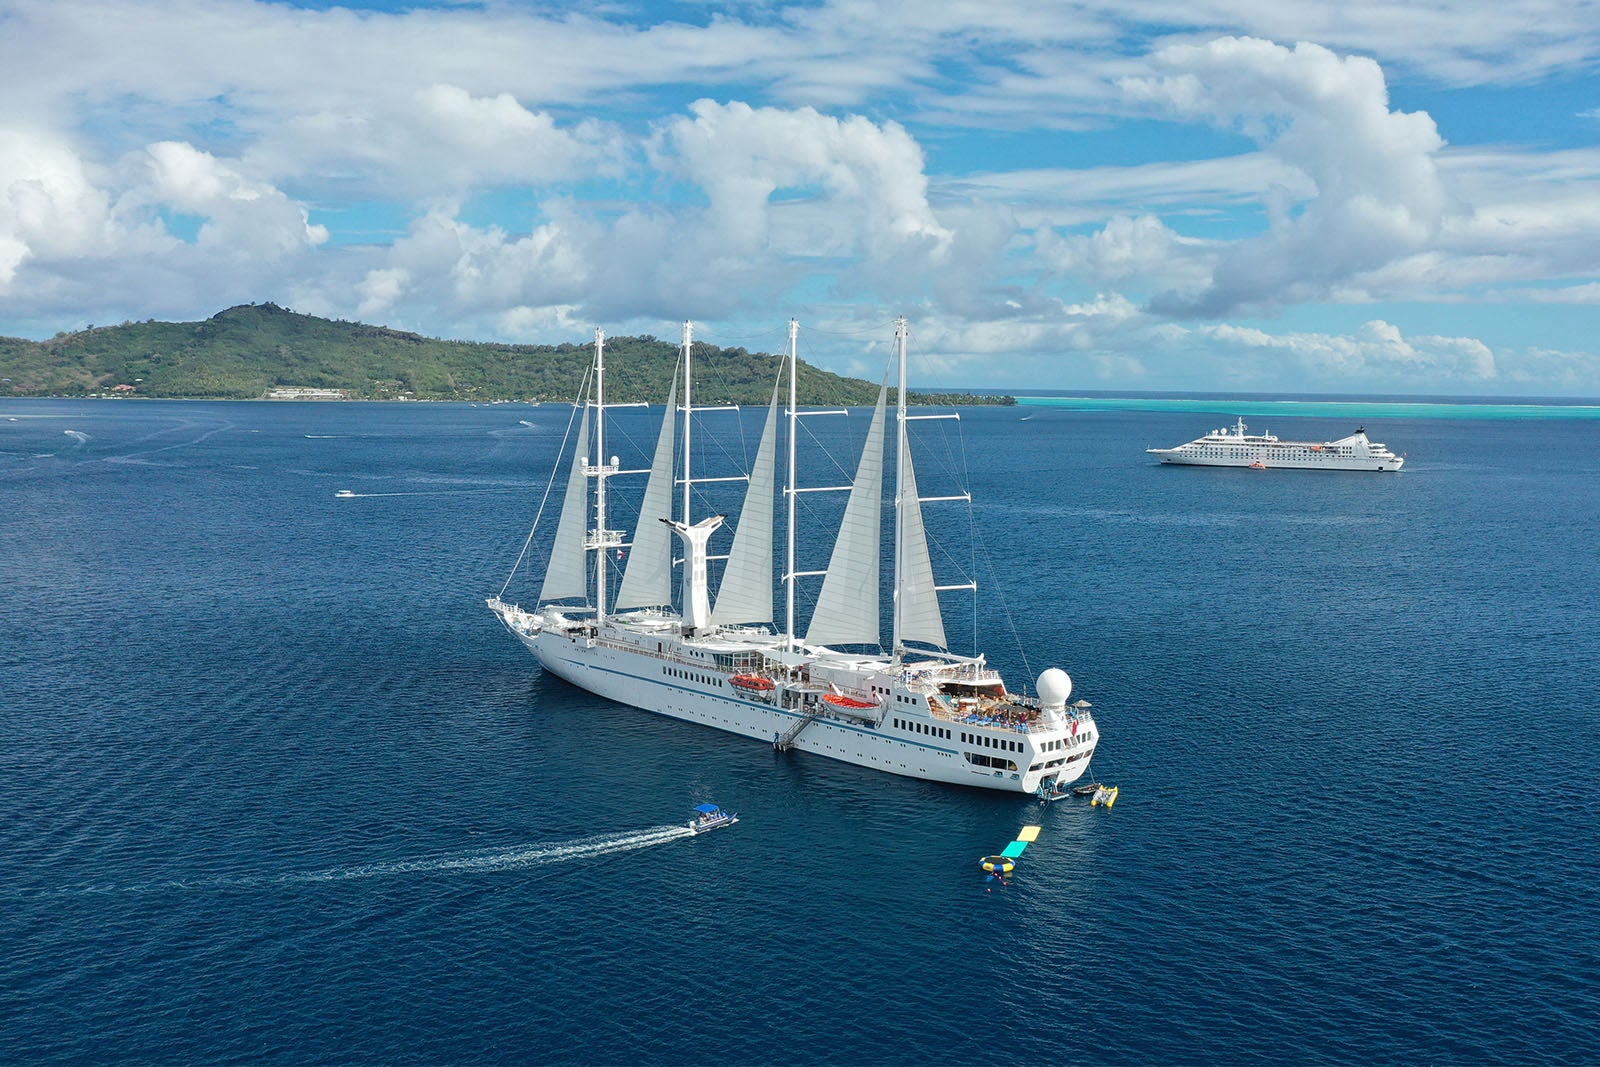 Masted cruise ship in French Polynesia